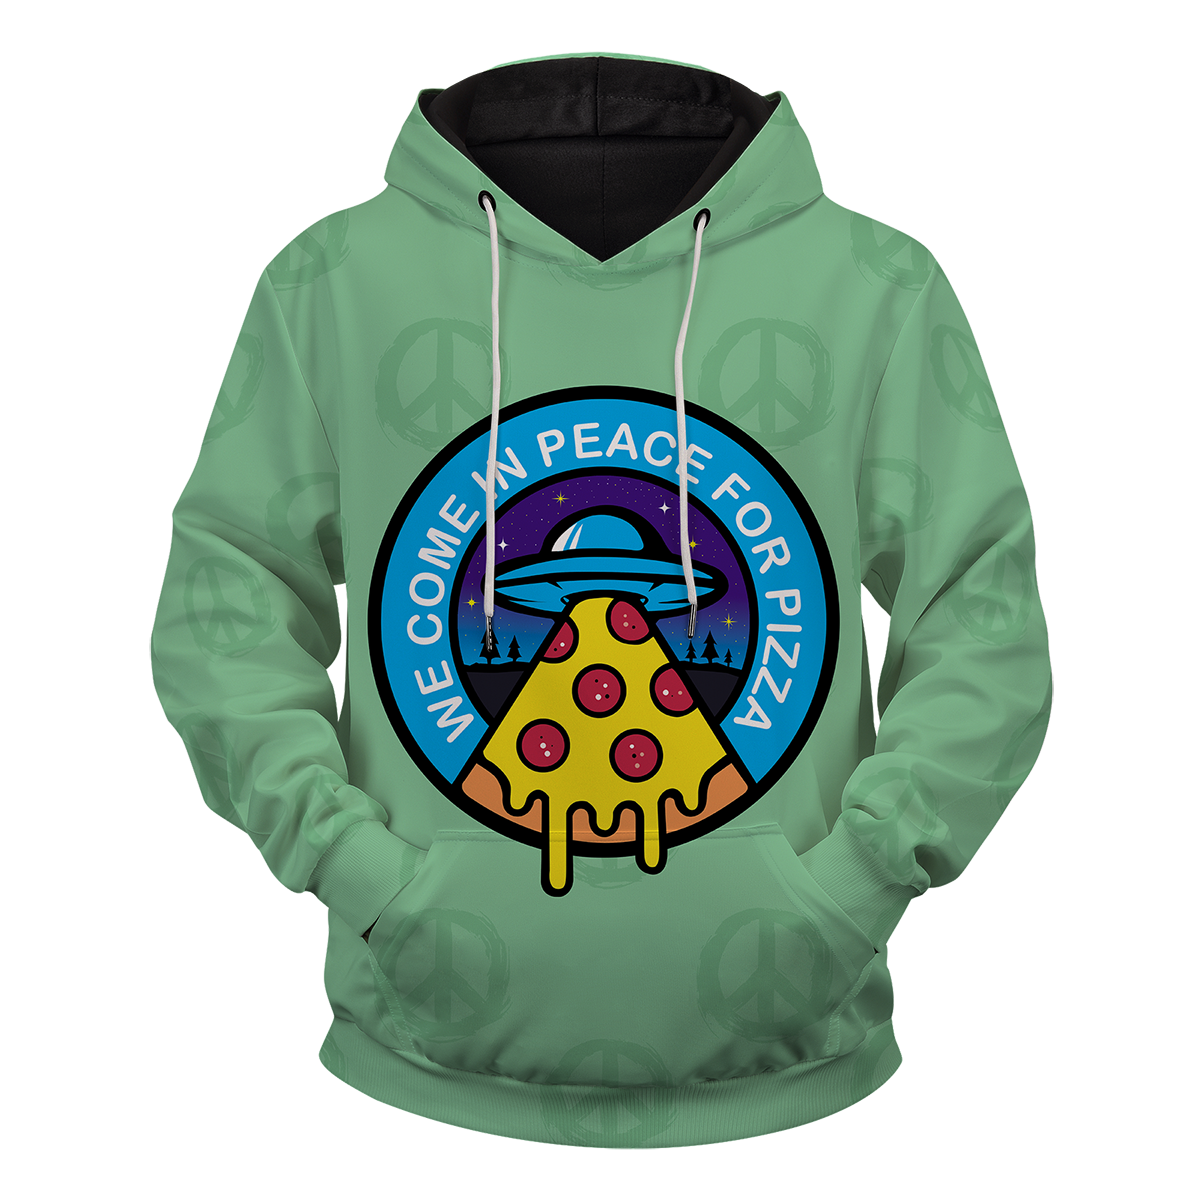 We come in peace for pizza Unisex Pullover Hoodie